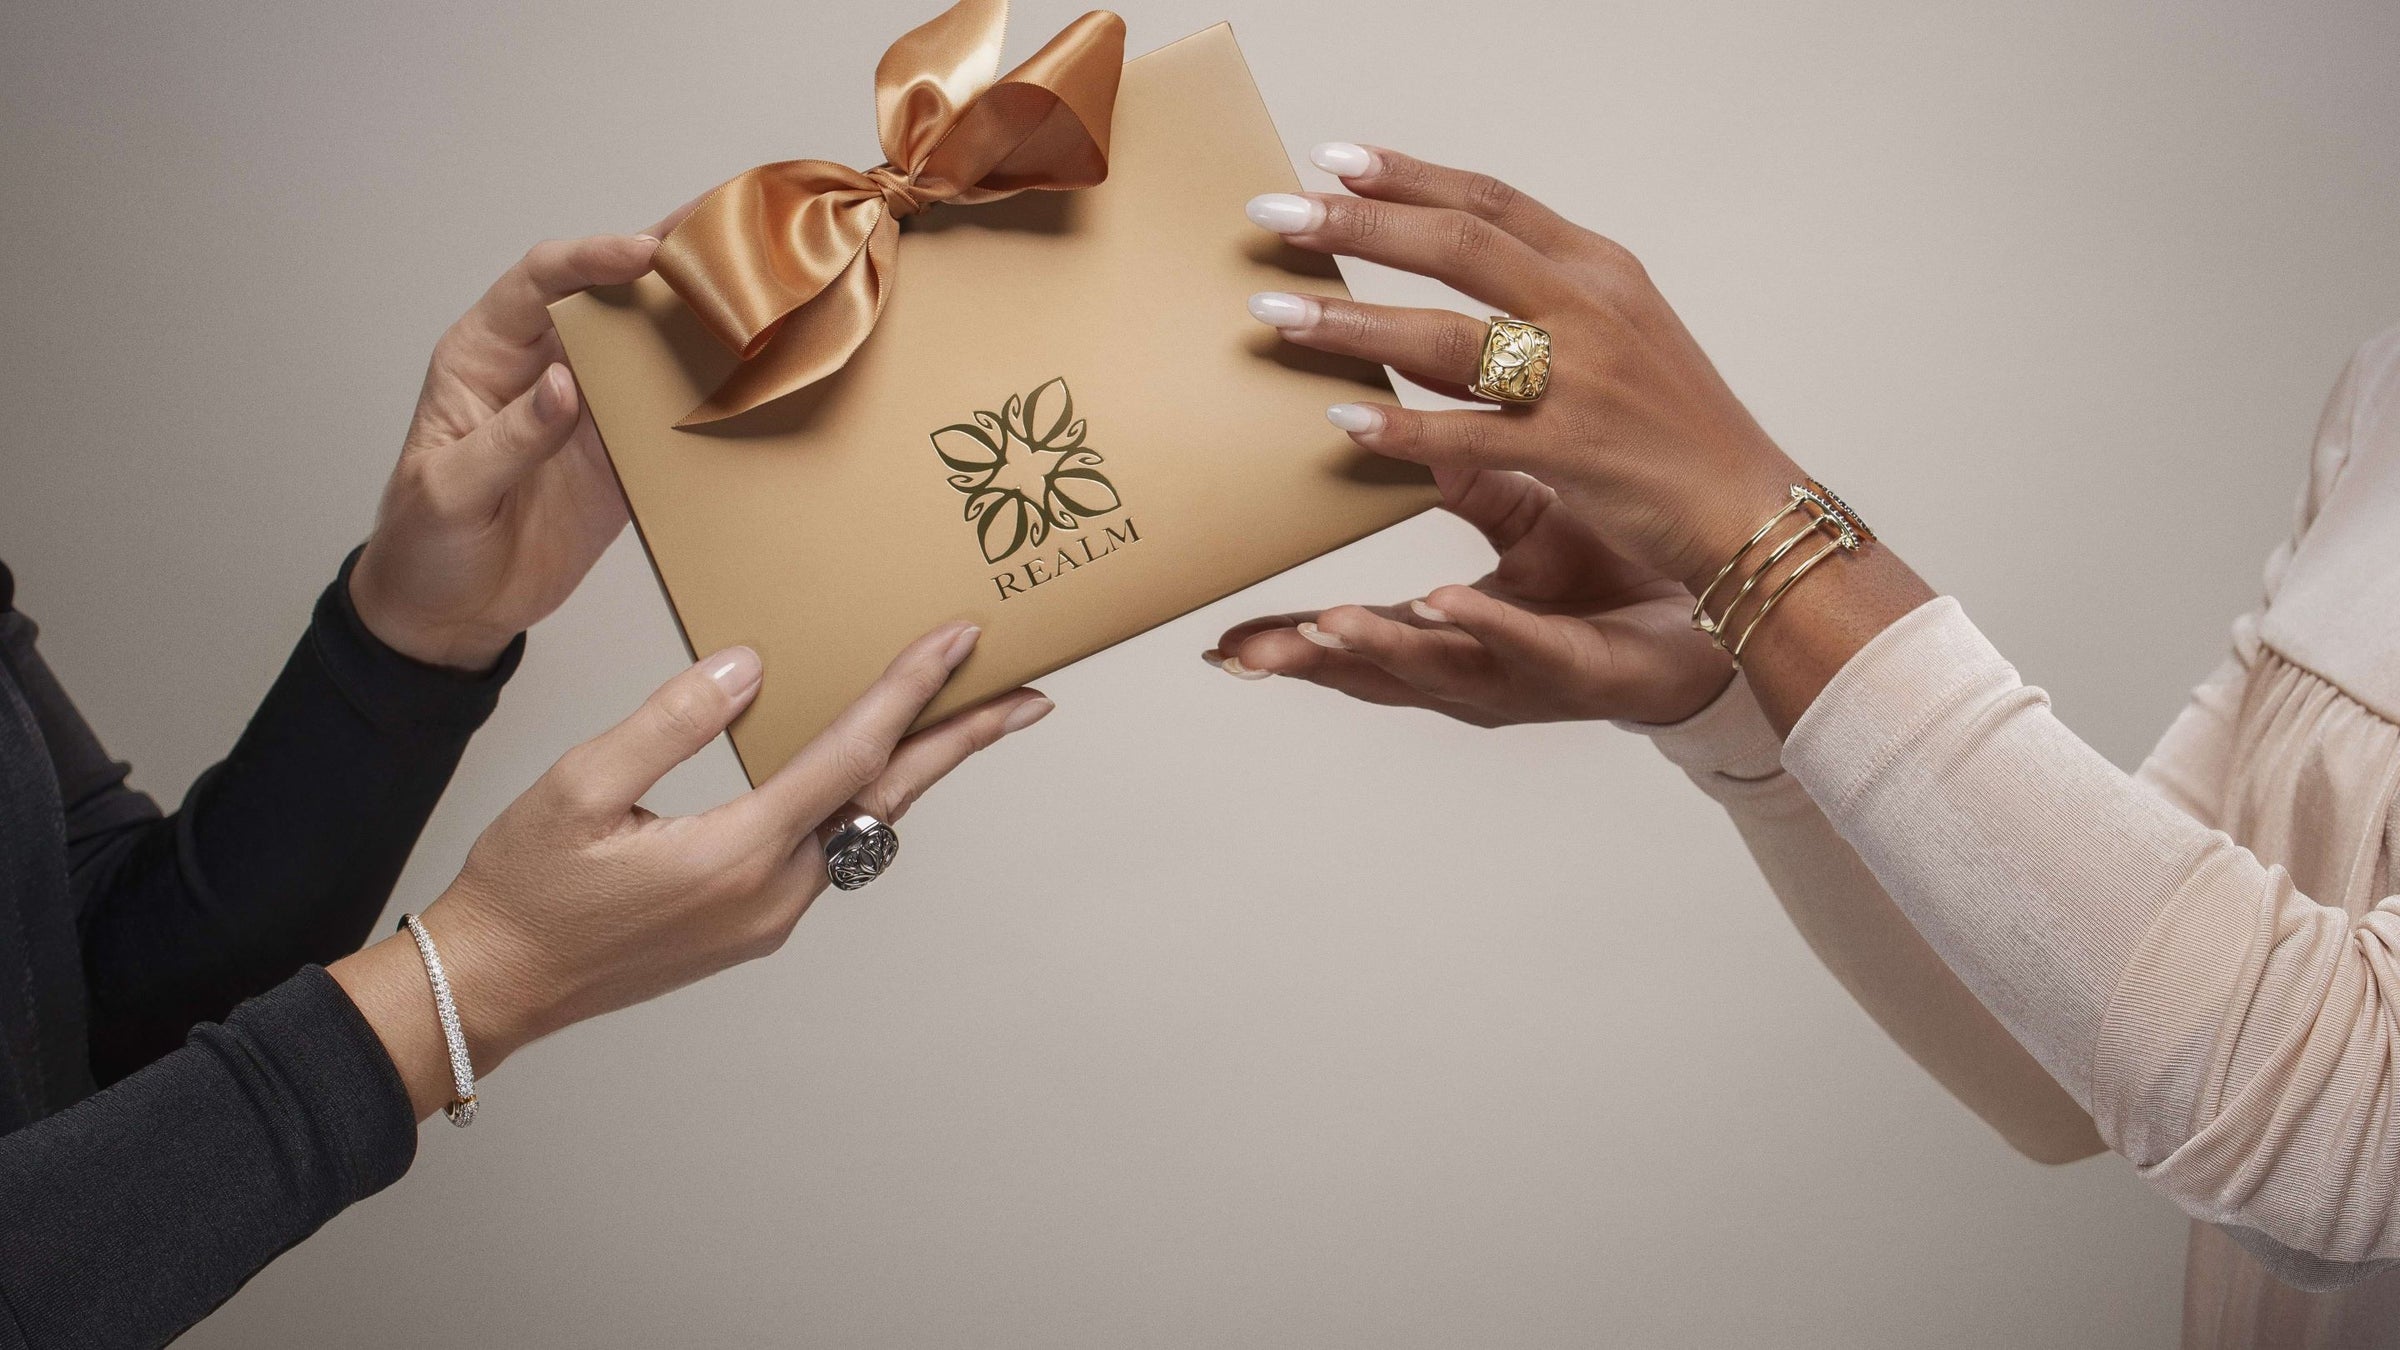 Women with bracelets and rings handing each other REALM gift gold bag